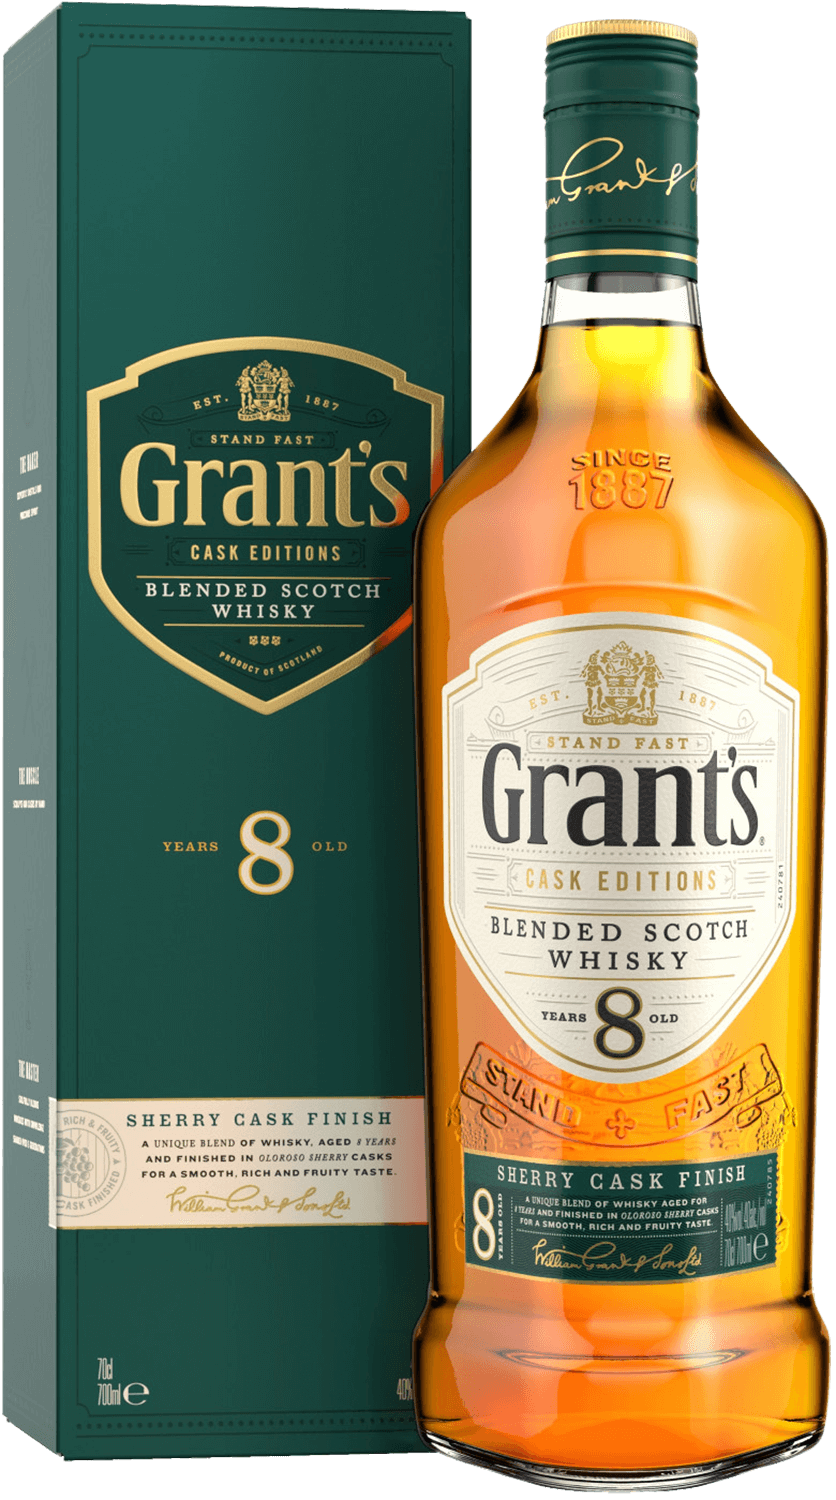 Grant's Sherry Cask Finish 8 y.o. Blended Scotch Whisky (gift box) grant s ale cask finish blended scotch whisky gift box